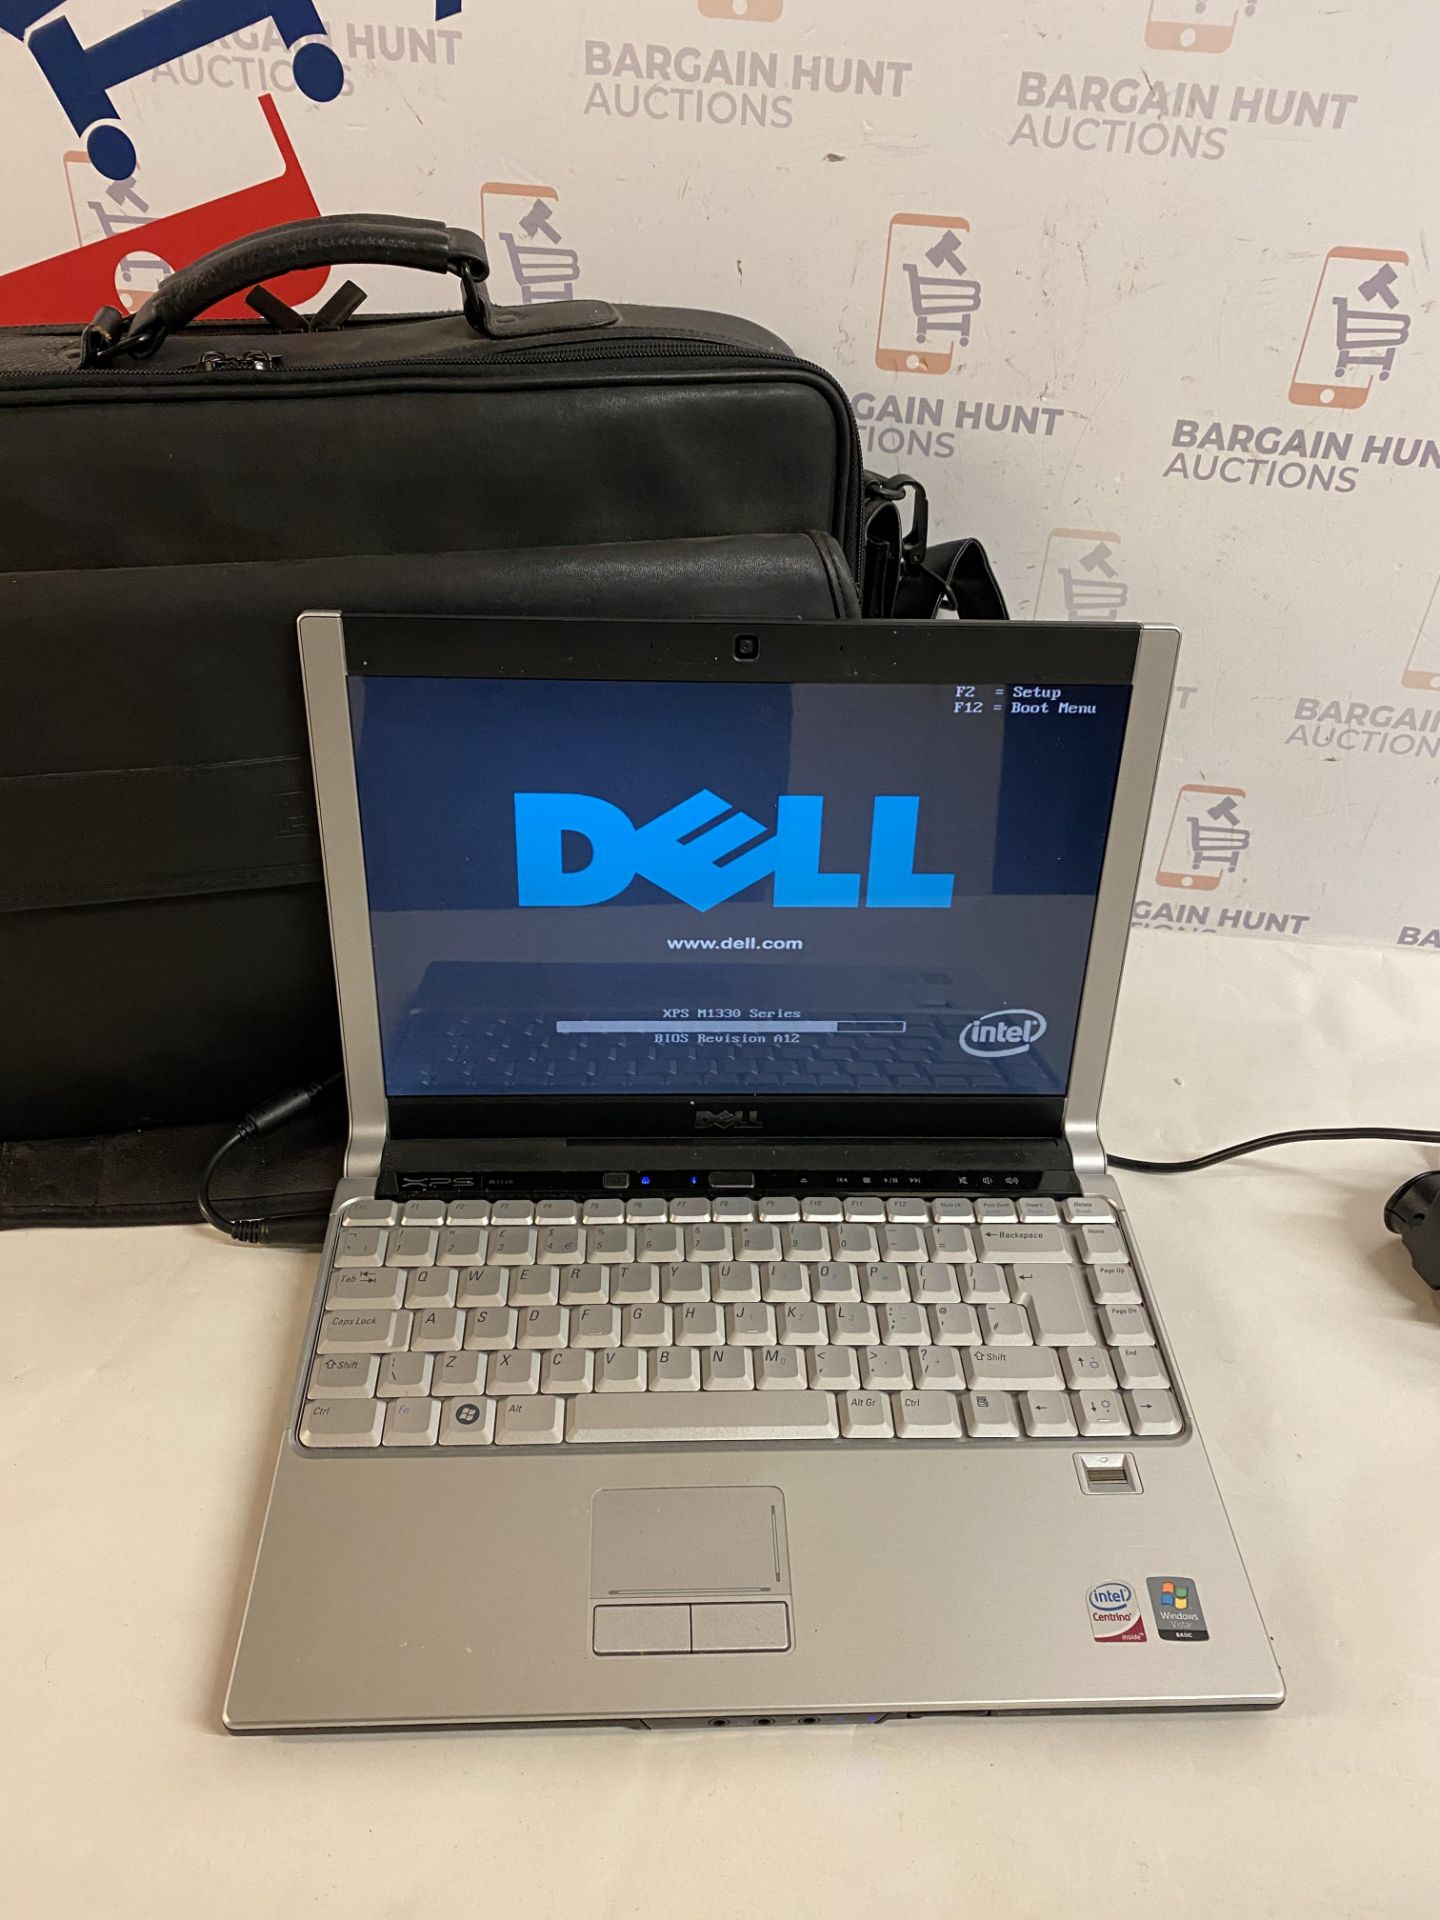 Dell XPS M1330 Laptop (may need new hard drive, see images)